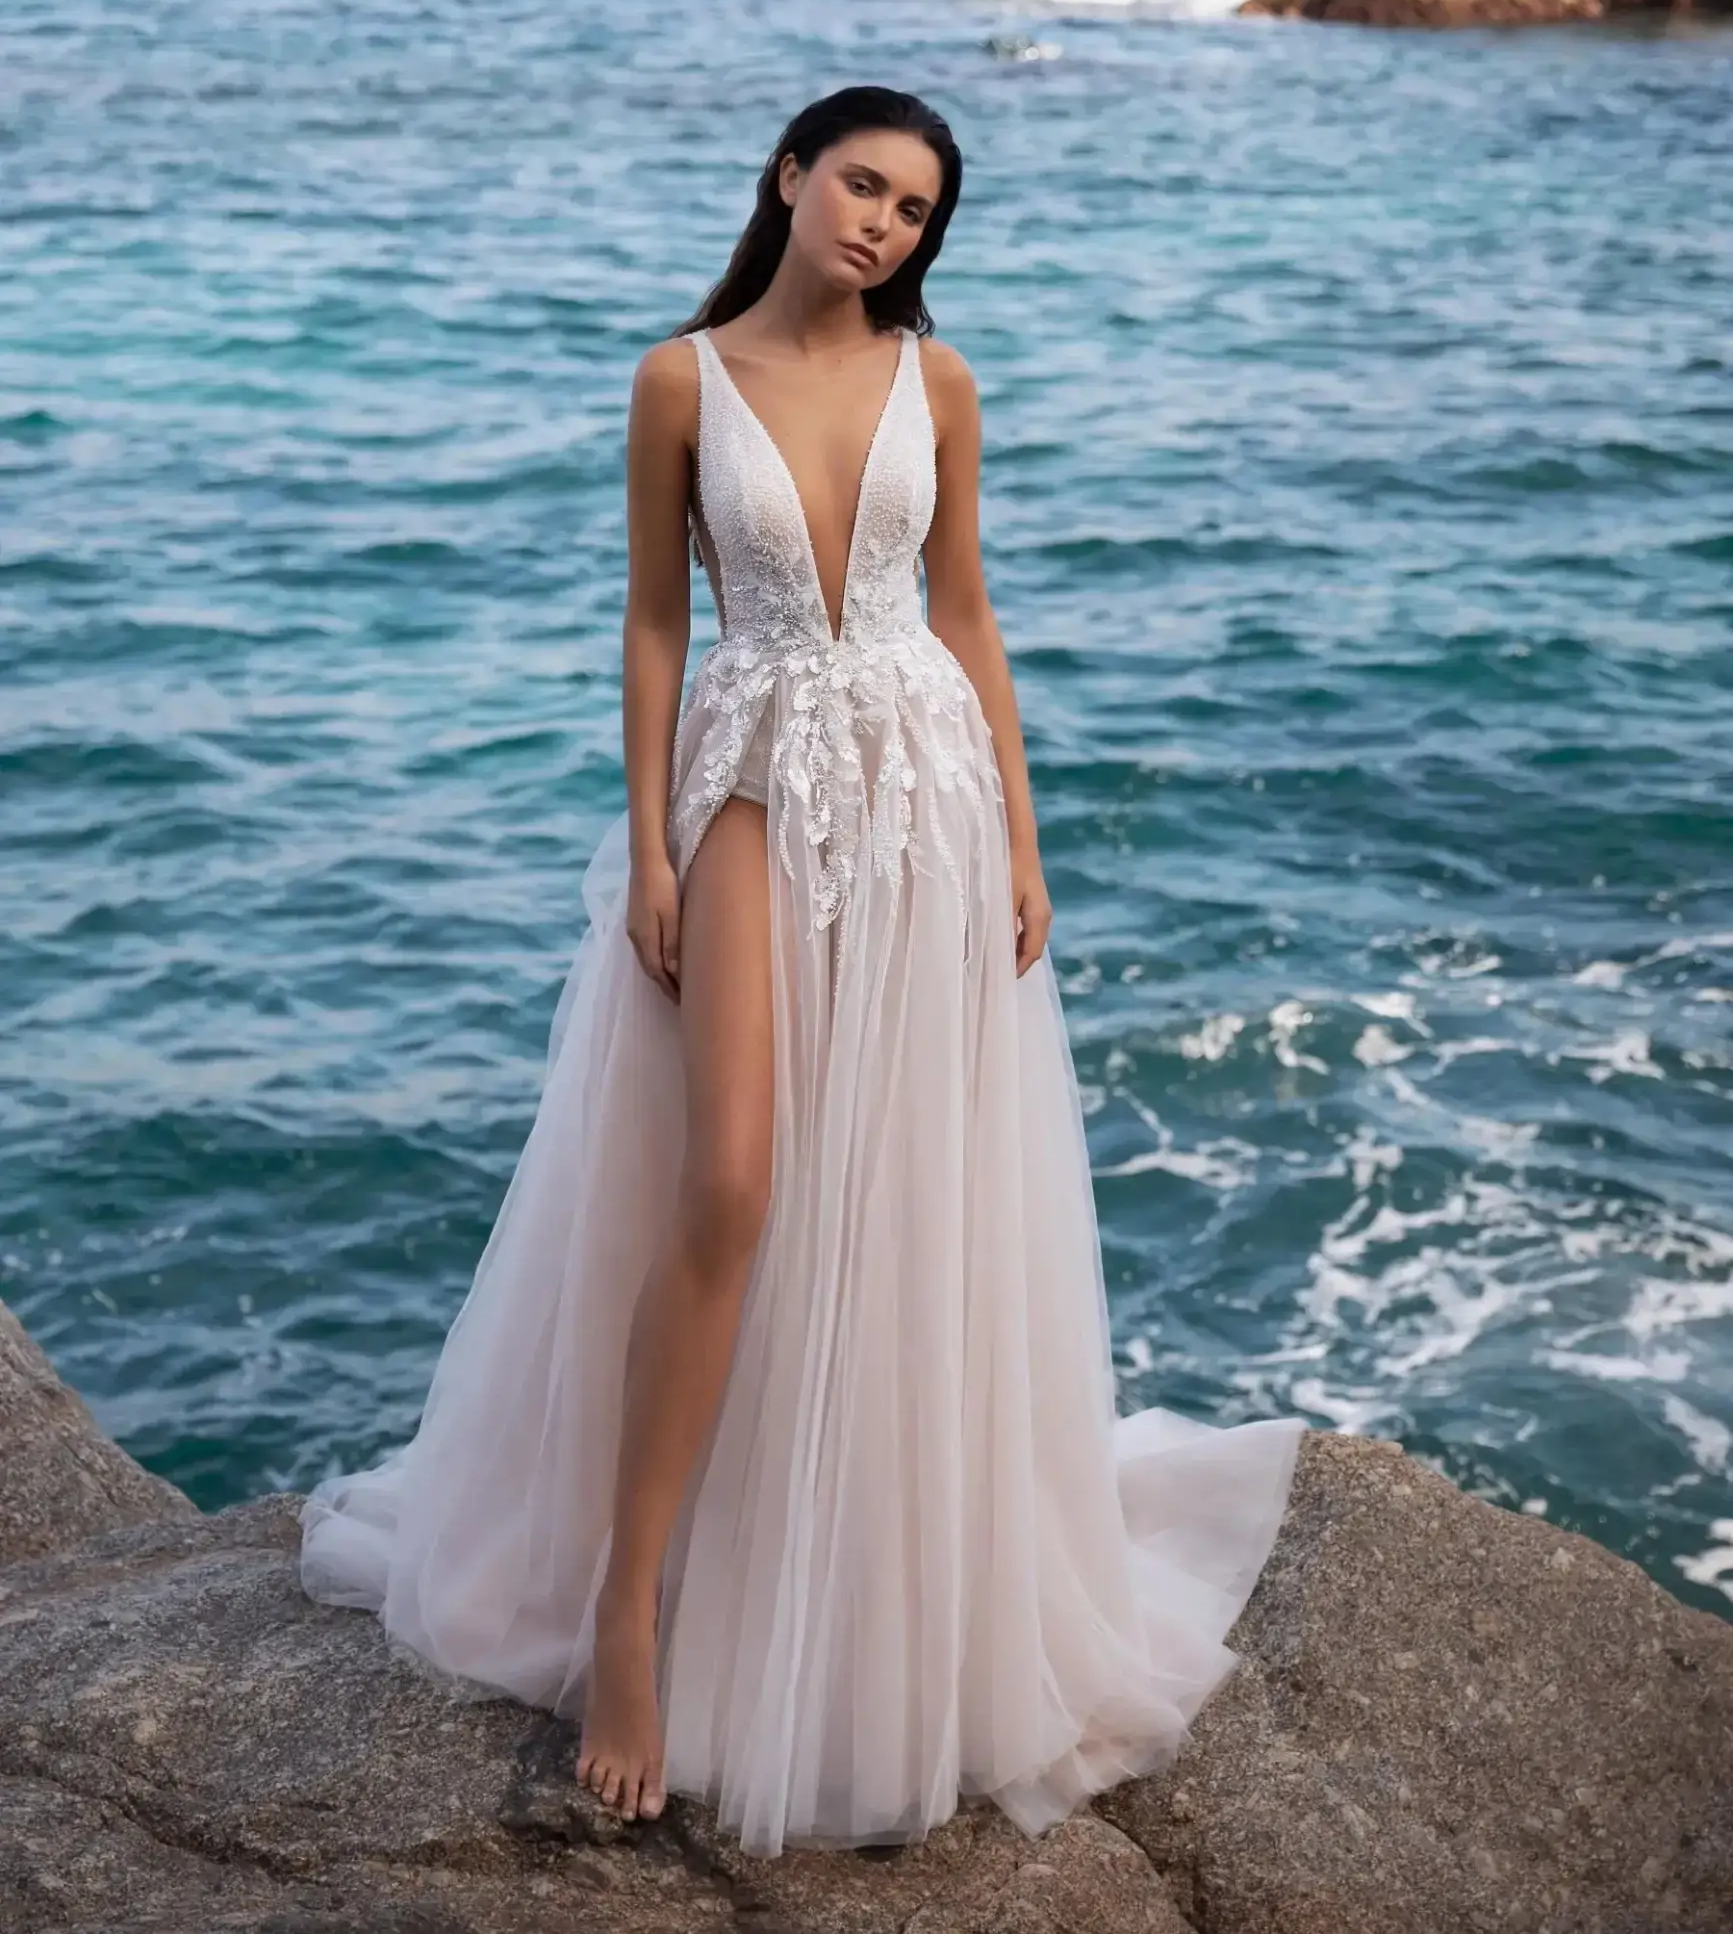 Bridal Elegance: Choosing the Perfect Sexy Bridal Gown Image